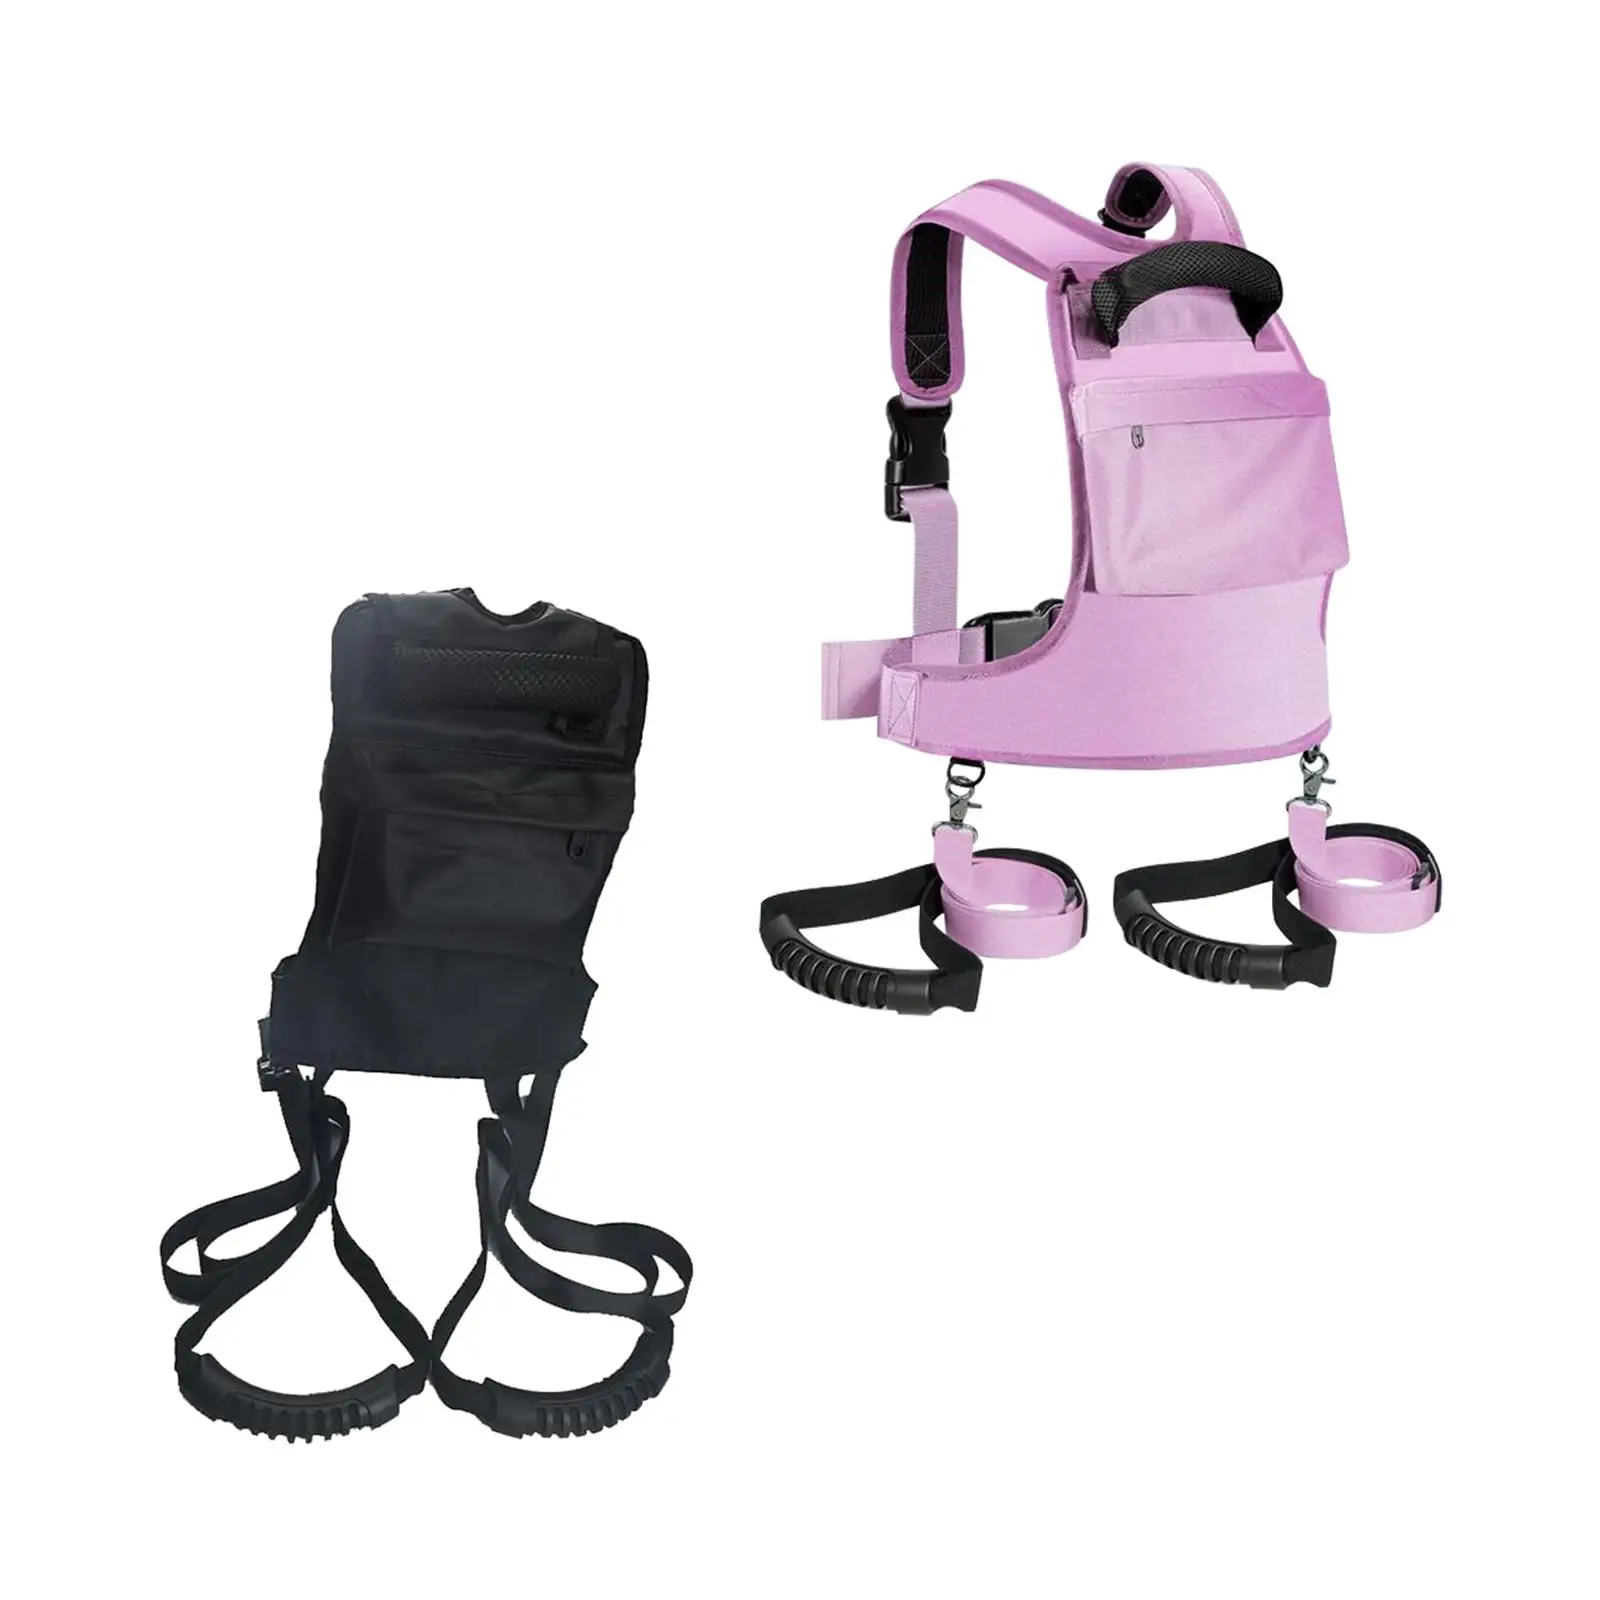 Kids Ski and Snowboard Harness with Removable Leash Learning to Ski Safely Ski